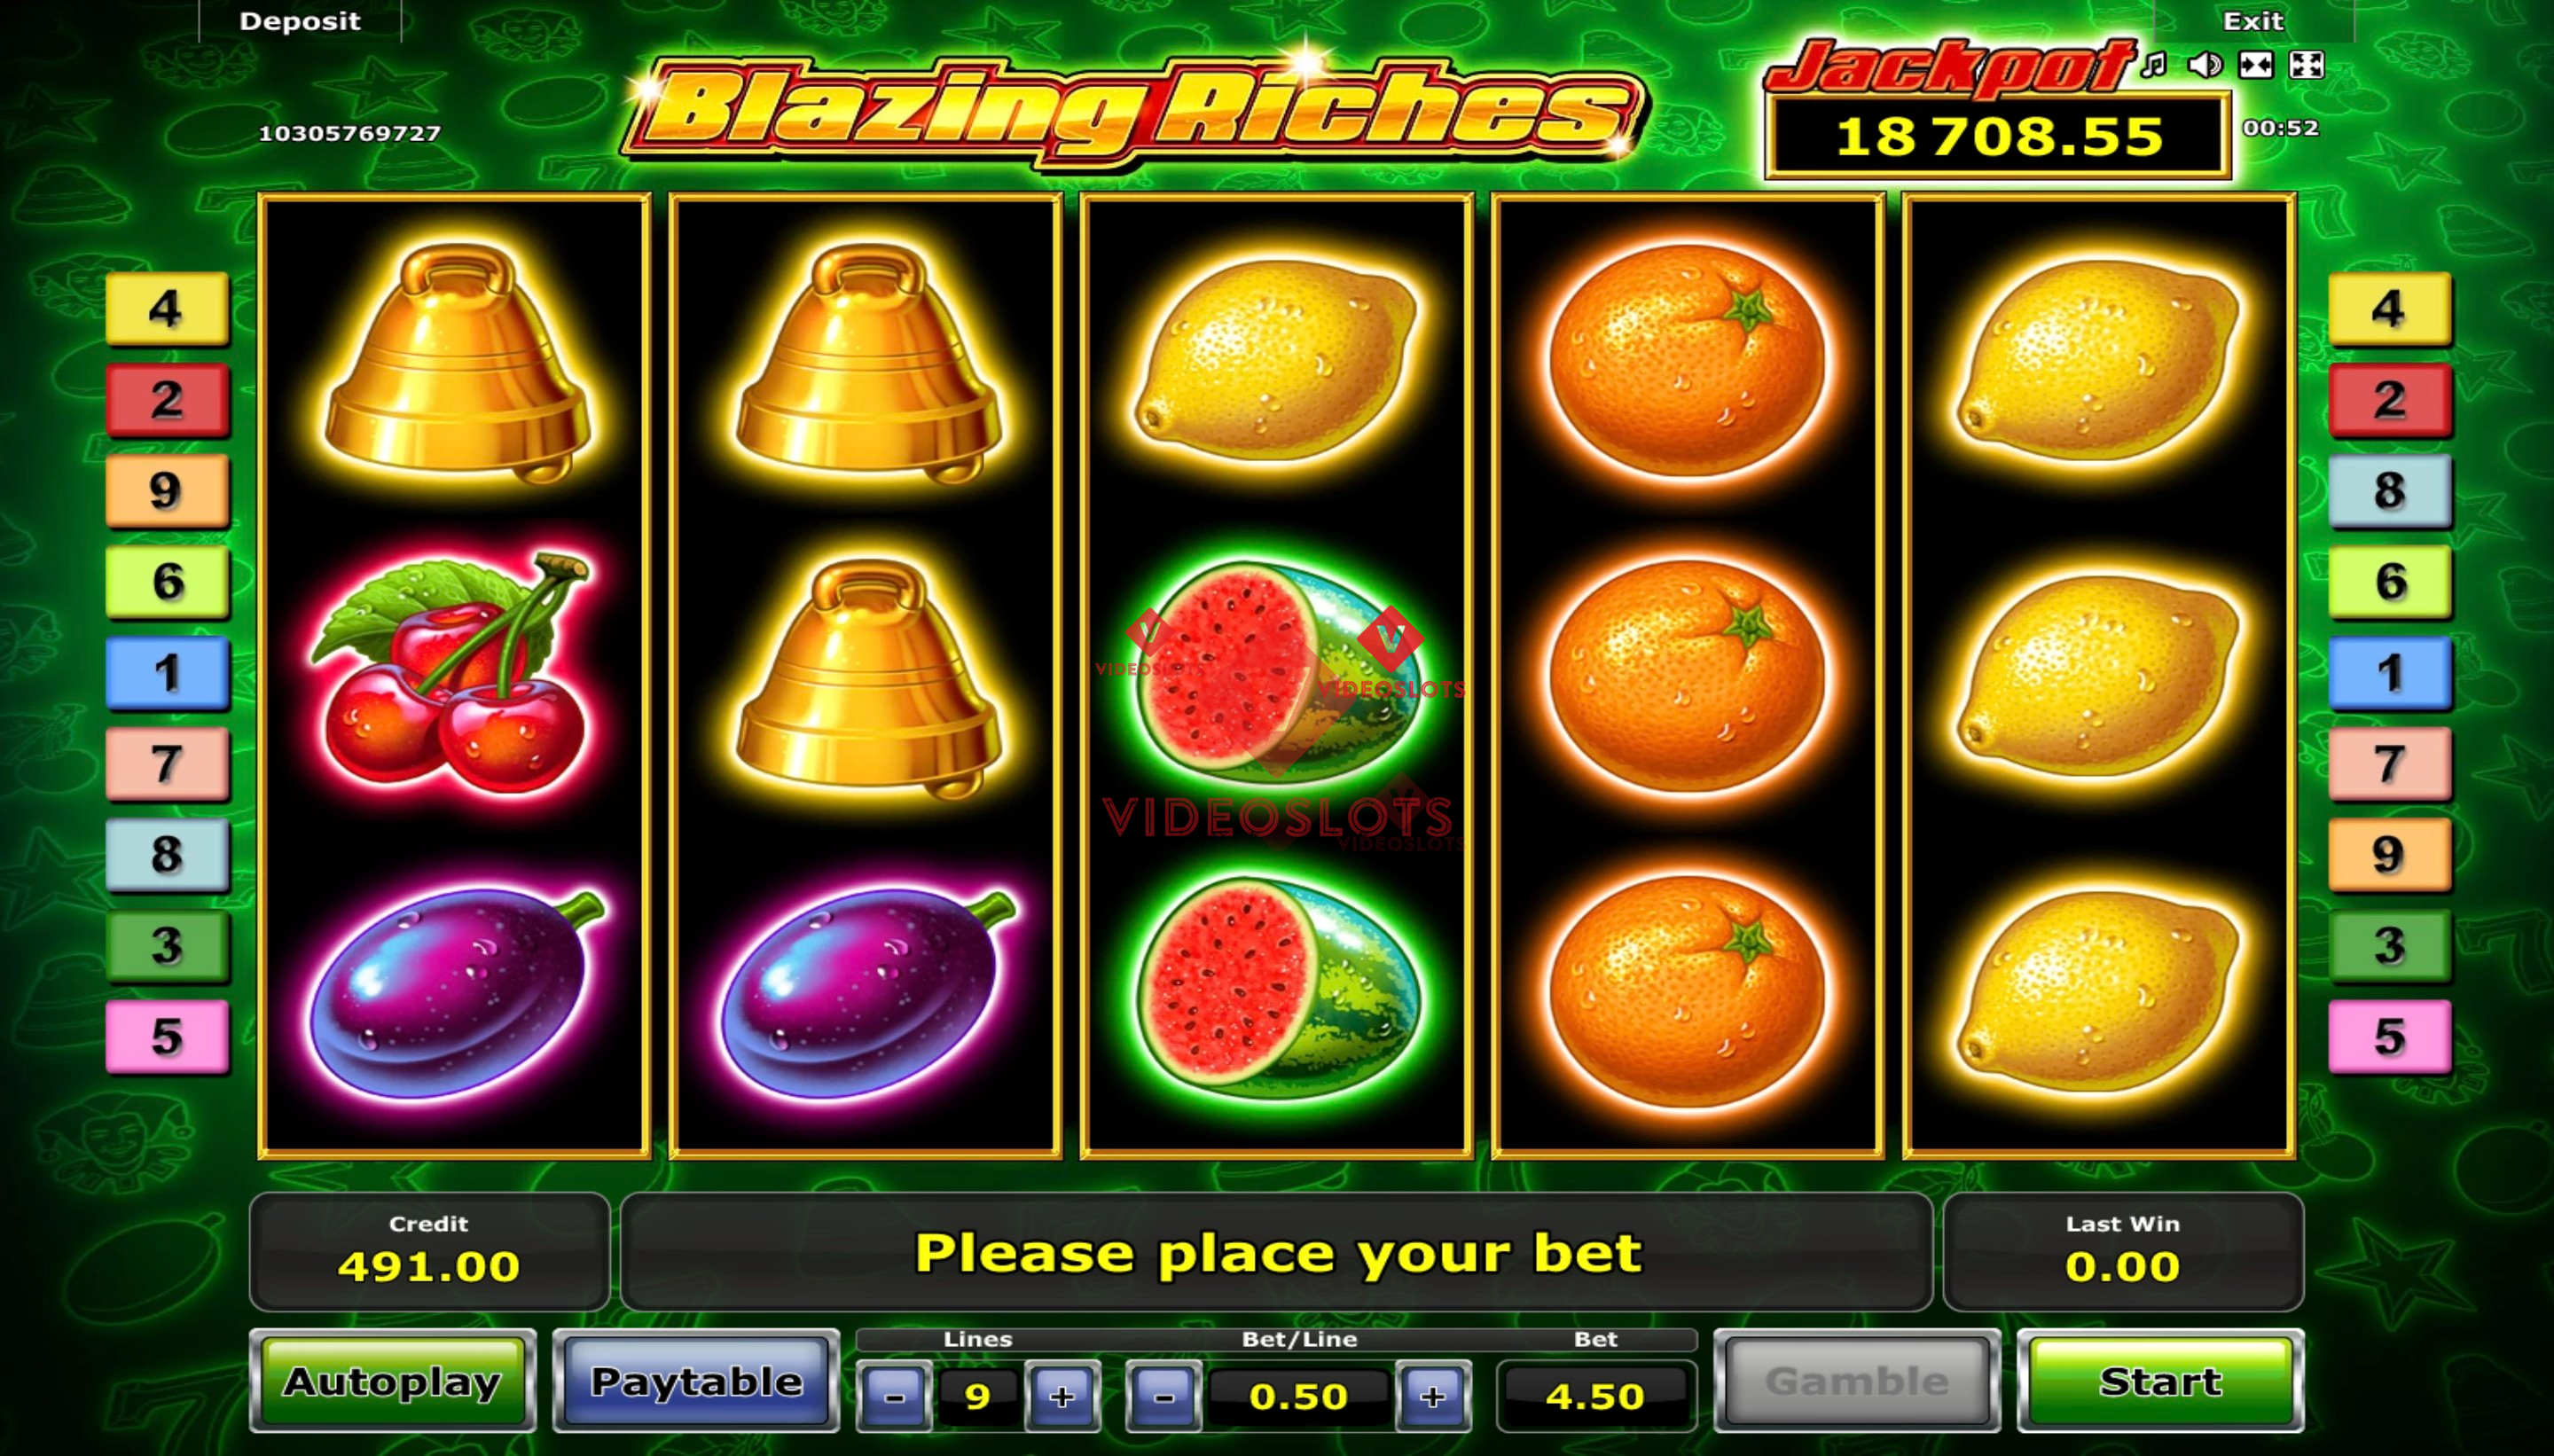 Base Game for Blazing Riches slot from Greentube